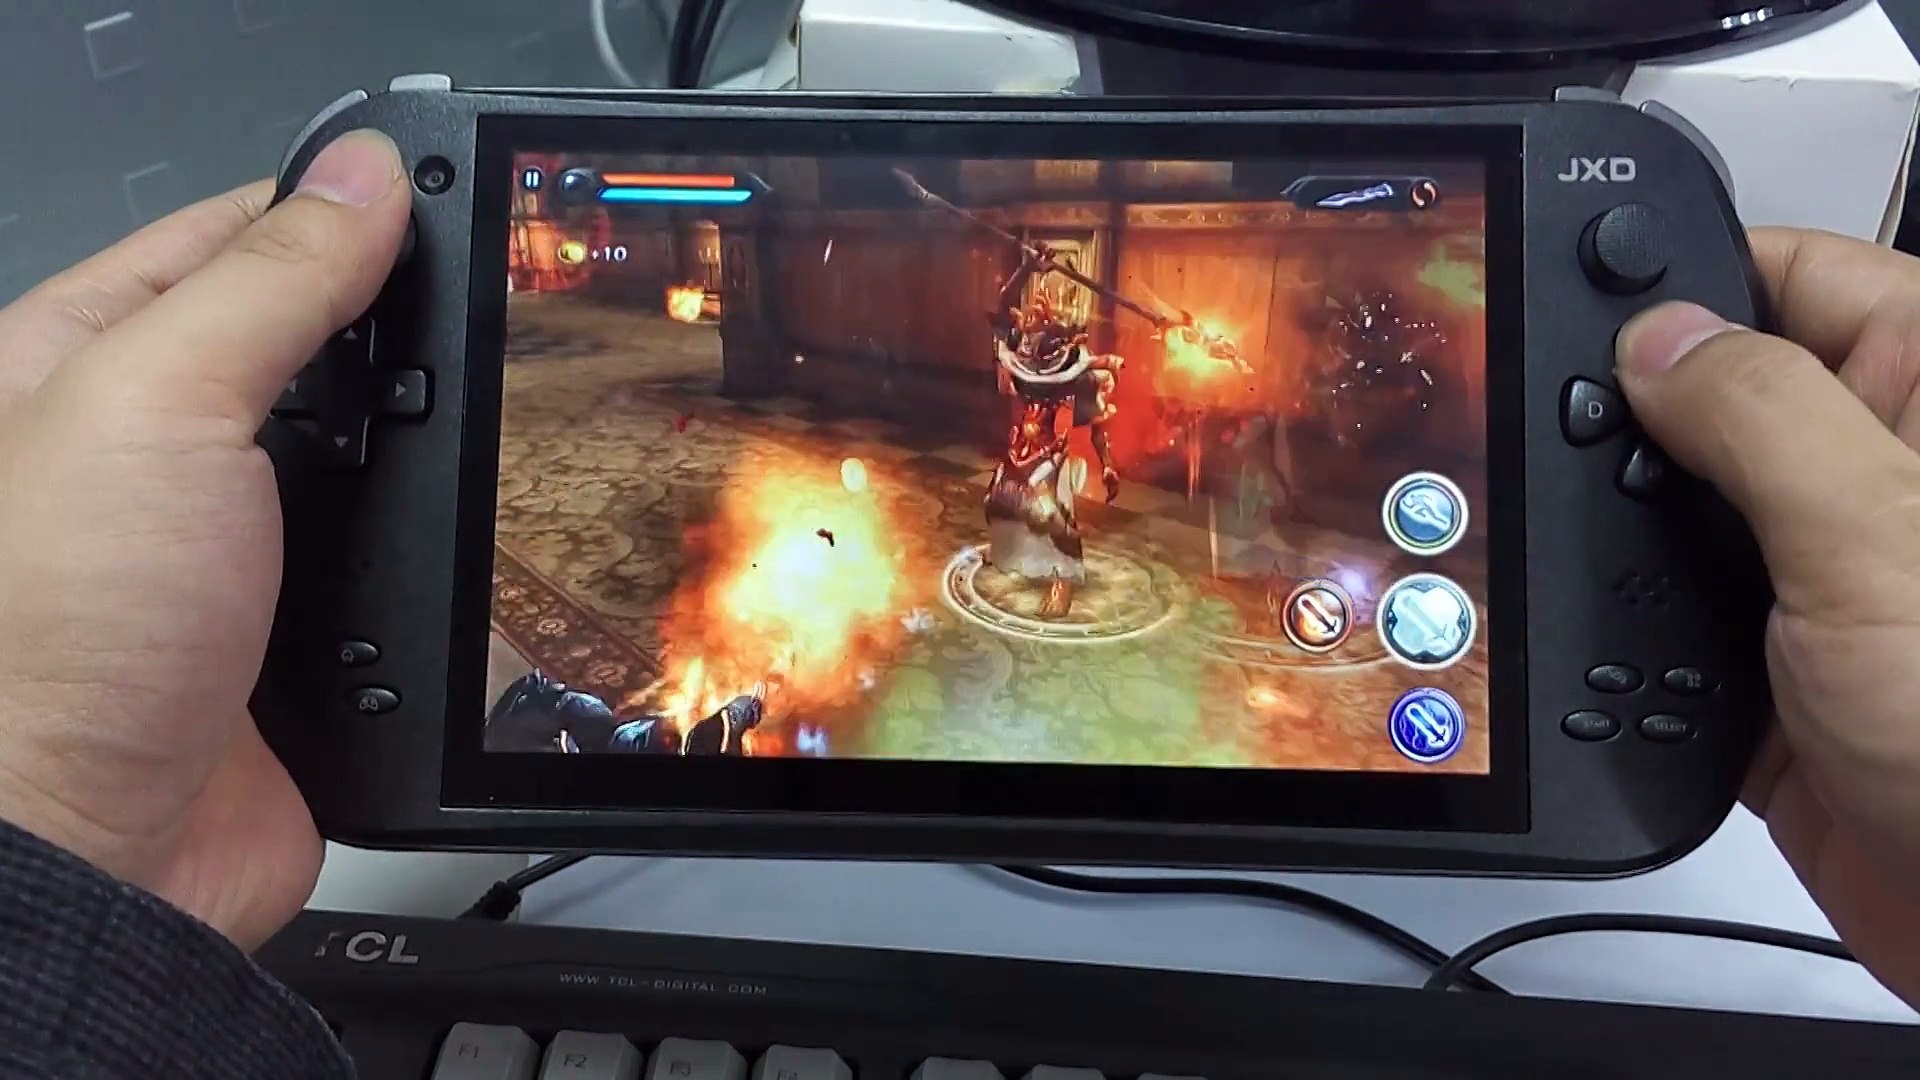 ⁣【09】 Wild Blood RPG Video Game on JXD S7800B Android game console